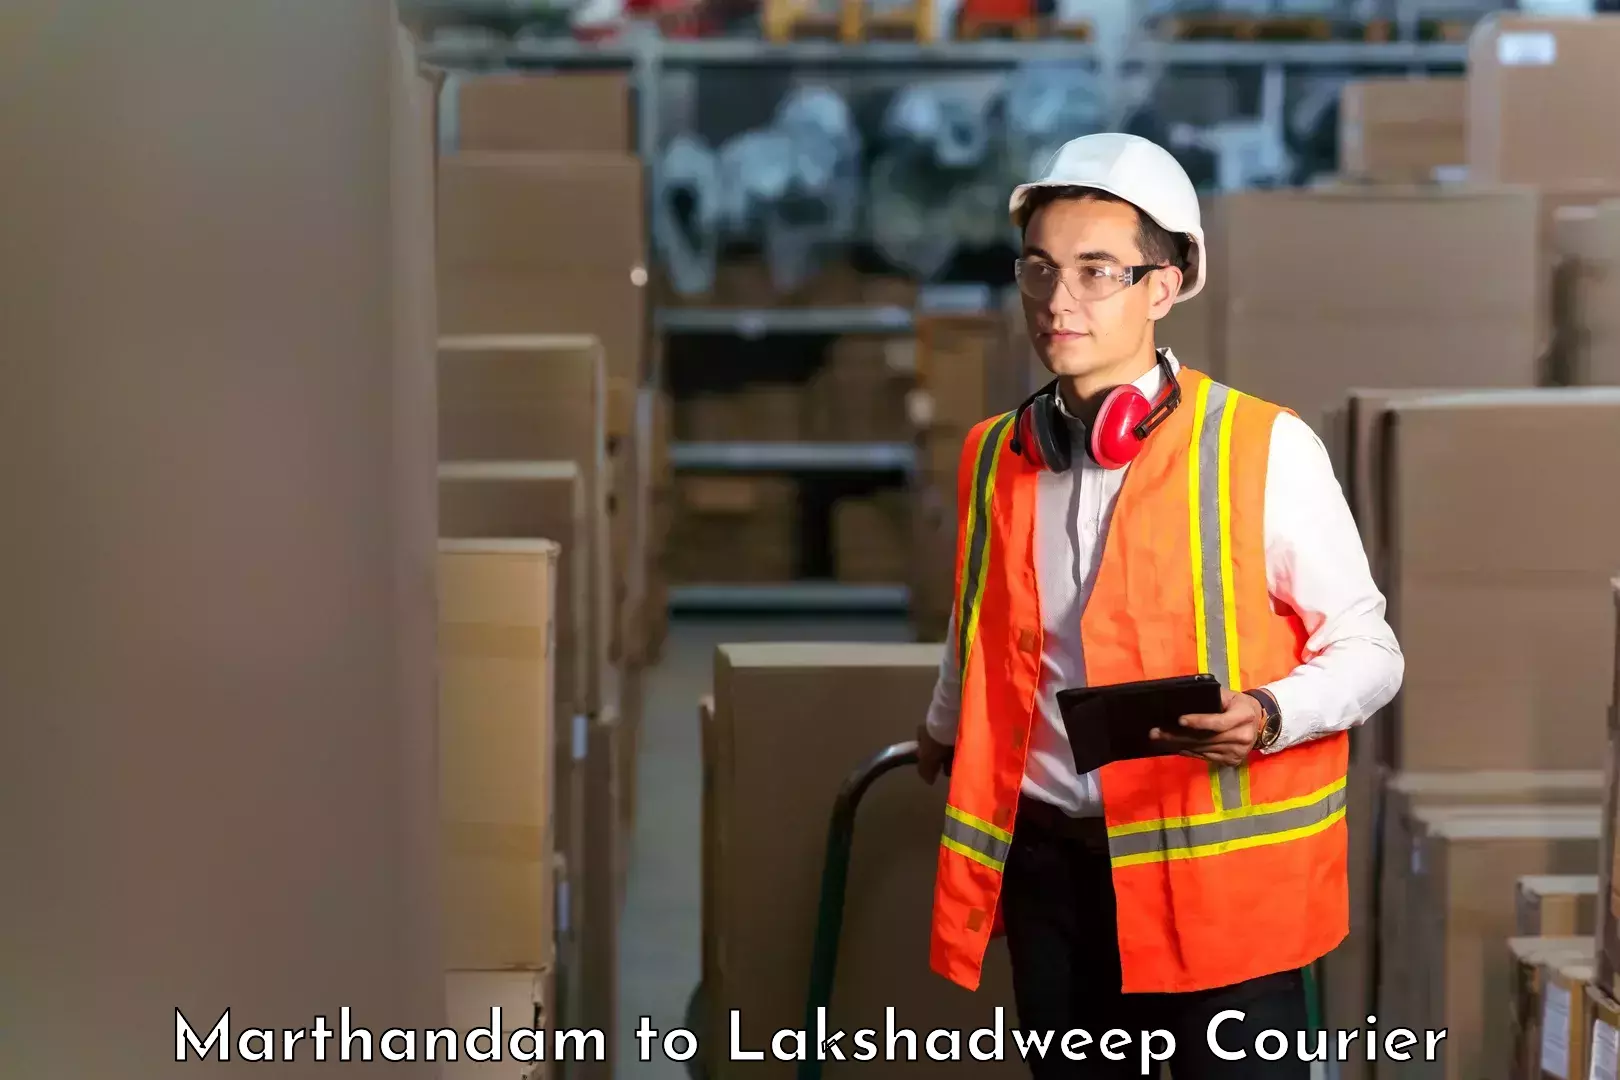 Efficient order fulfillment in Marthandam to Lakshadweep